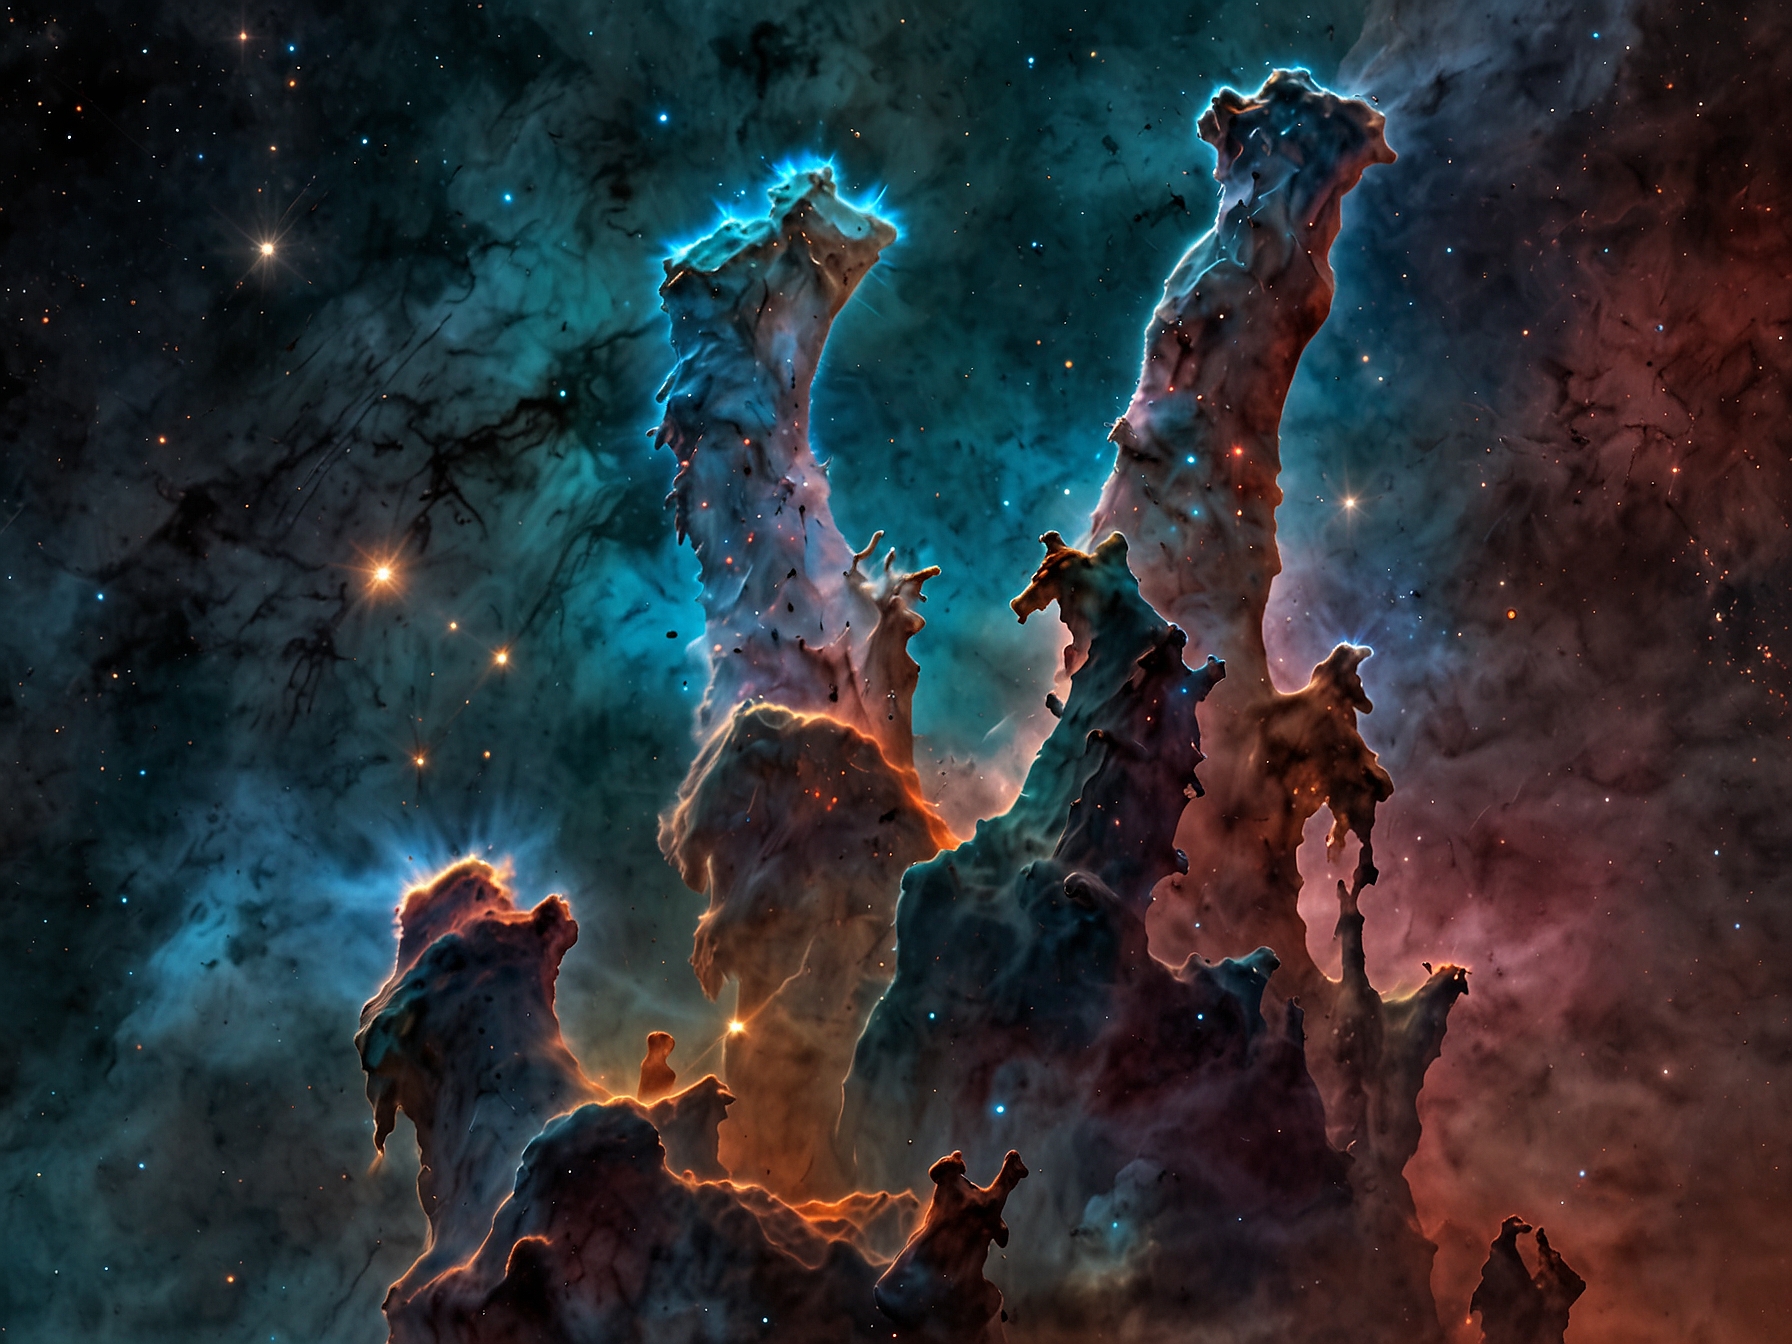 A stunning 3D visualization of the ethereal Pillars of Creation, combining Hubble's visible light images with James Webb's infrared data, showcasing intricate details of this stellar nursery.